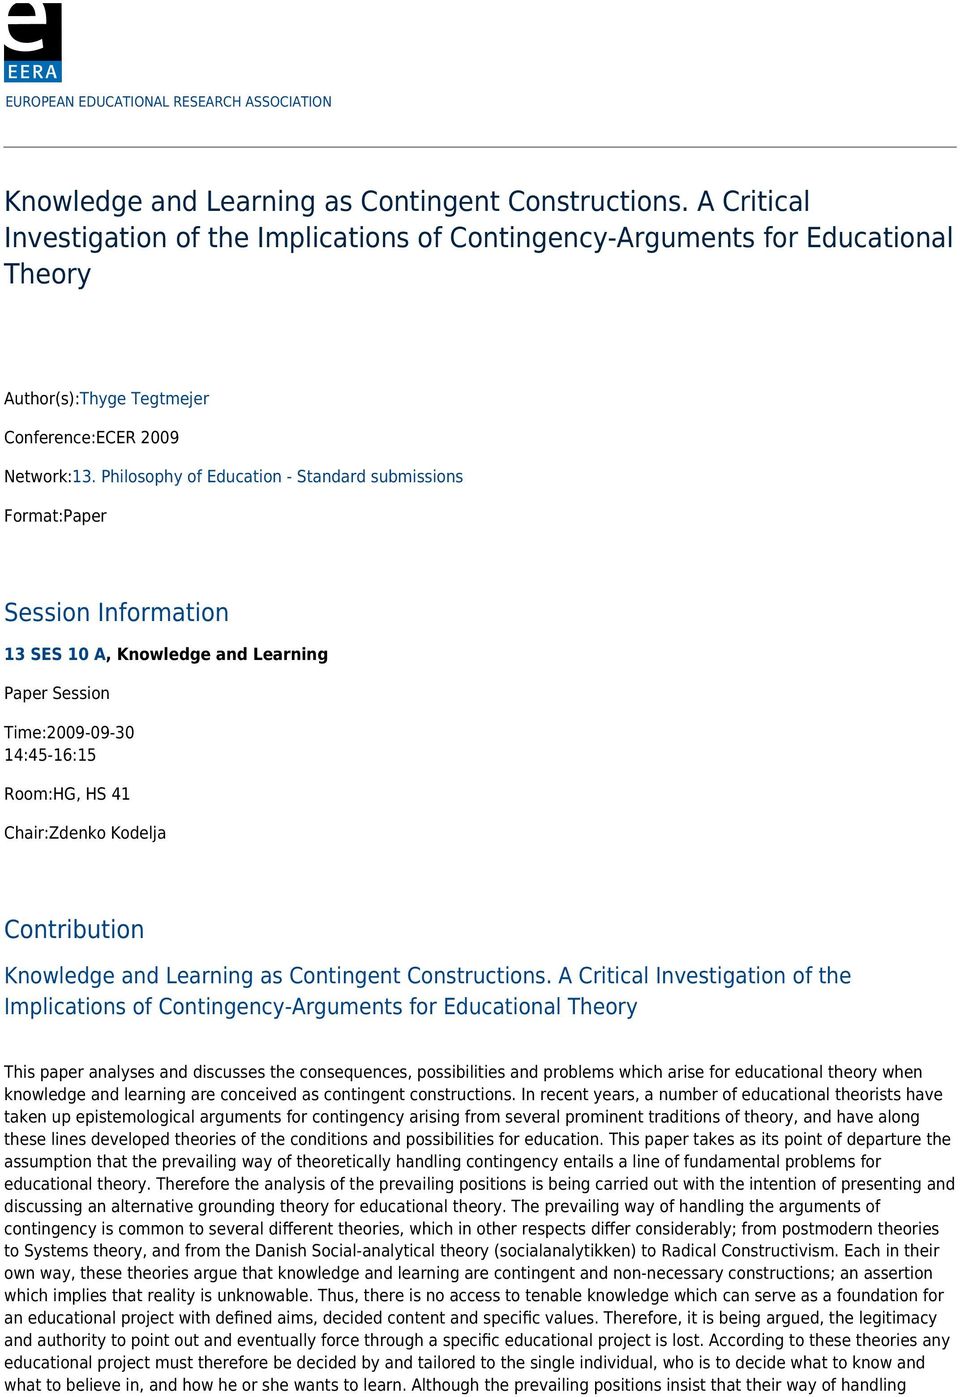 Philosophy of Education - Standard submissions Format:Paper Session Information 13 SES 10 A, Knowledge and Learning Paper Session Time:2009-09-30 14:45-16:15 Room:HG, HS 41 Chair:Zdenko Kodelja